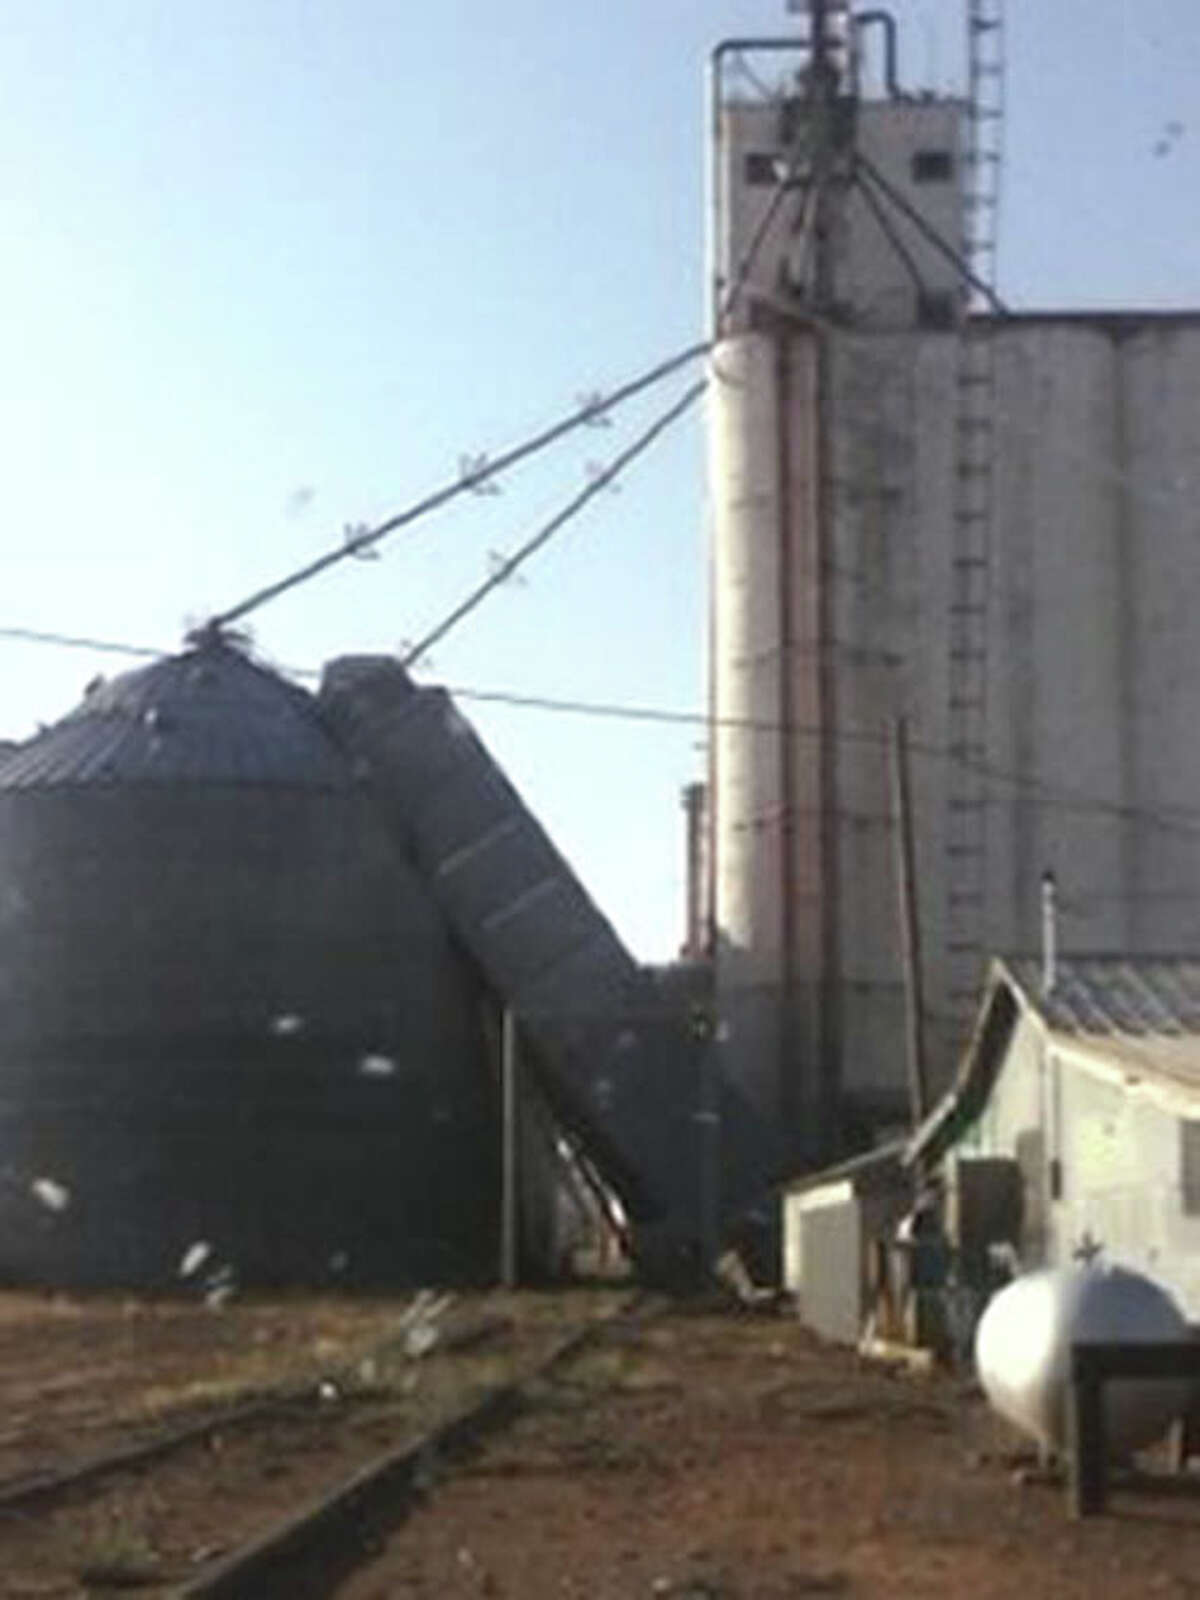 A storm that pushed through Hart shortly before 7 p.m. Wednesday pushed a grain drier against a metal silo at the Northern Ag elevator in Hart in this scene captured by Herald carrier Salvador Arteaga. Several residents in the area report that damage was caused by a tornado, although it has not been confirmed by the National Weather Service.